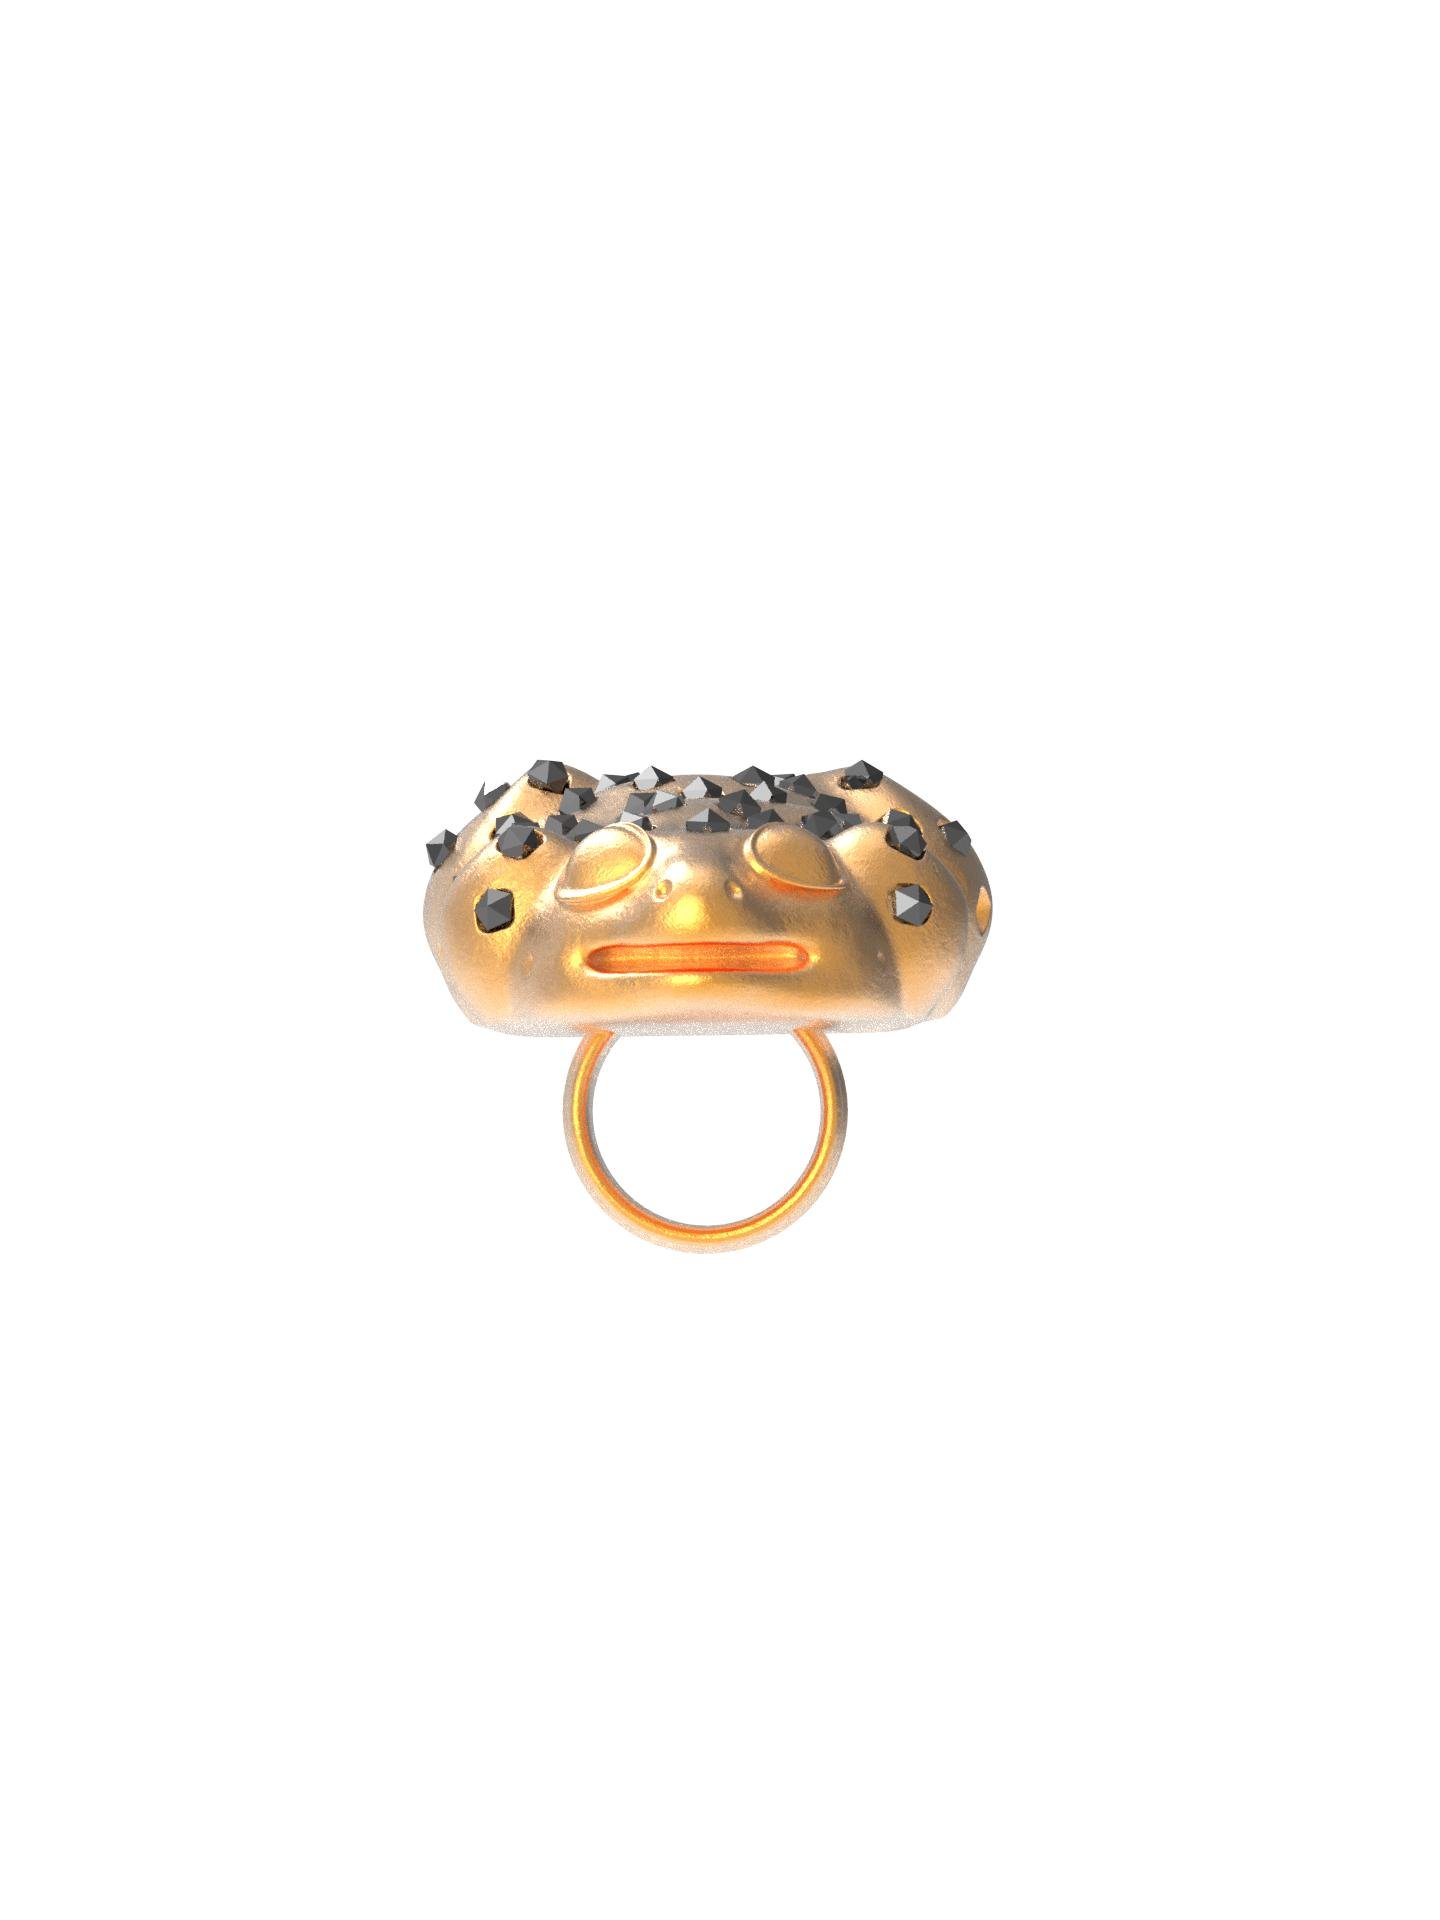 AKAN FROG RING by ORIGHO